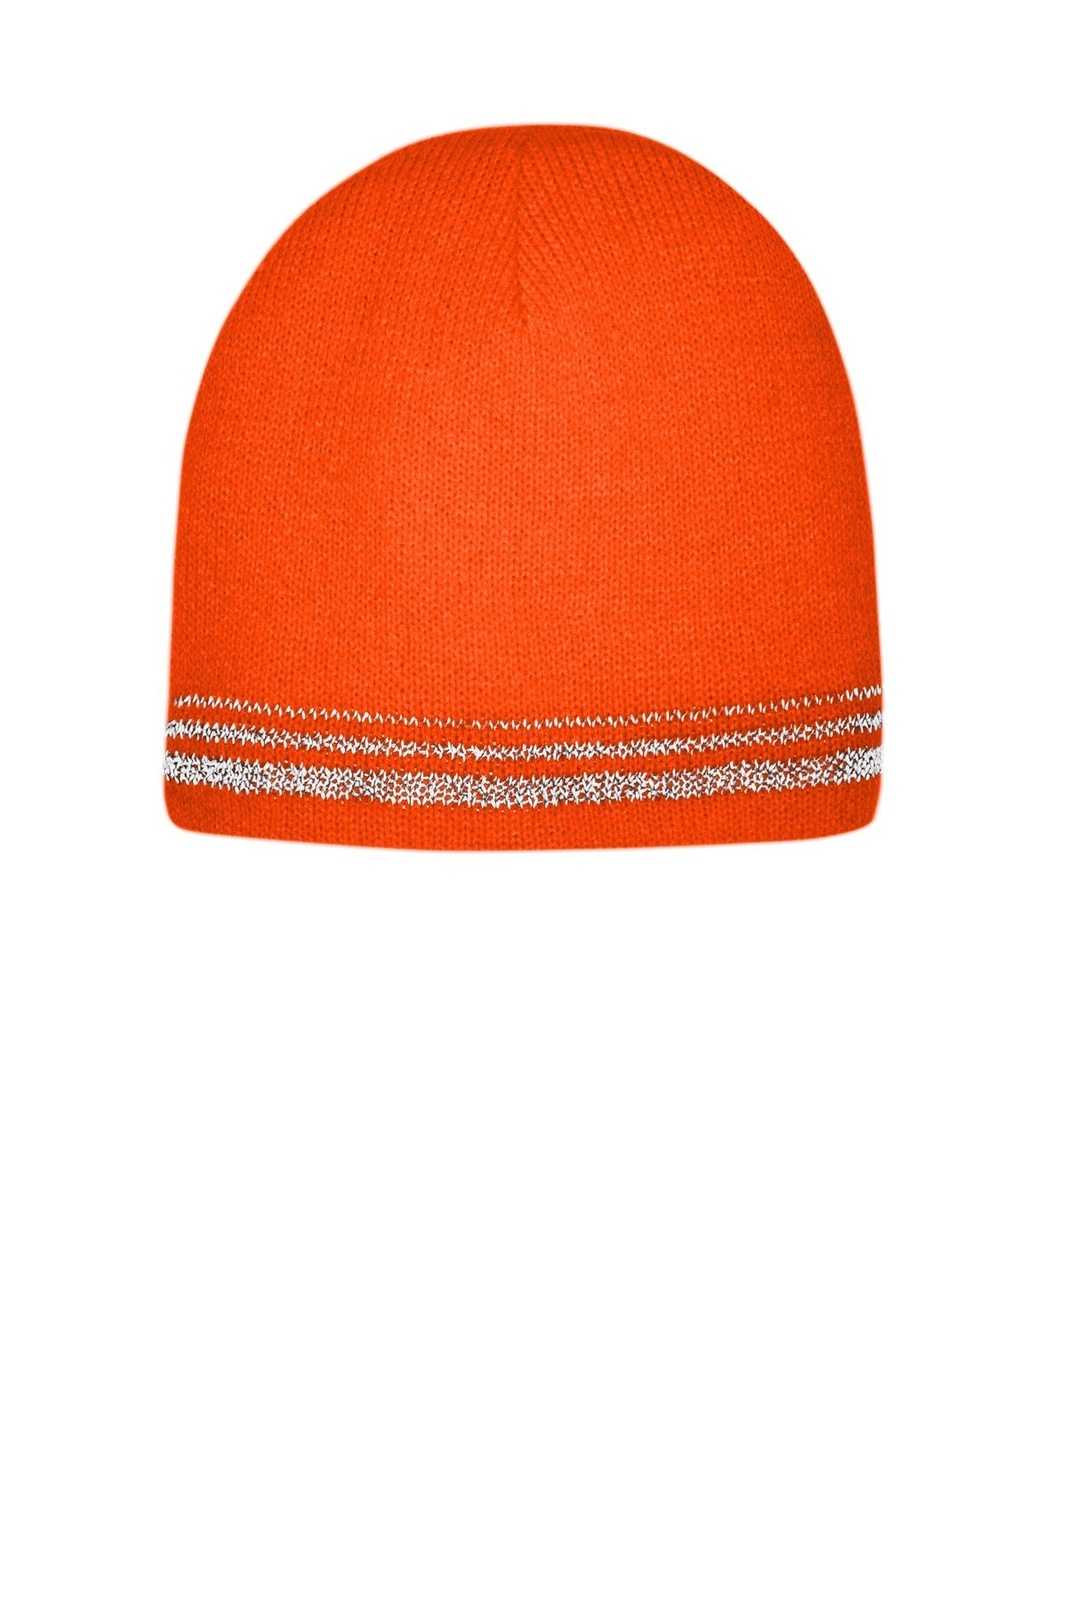 CornerStone CS804 Lined Enhanced Visibility with Reflective Stripes Beanie CS804 - Safety Orange Reflective - HIT a Double - 1